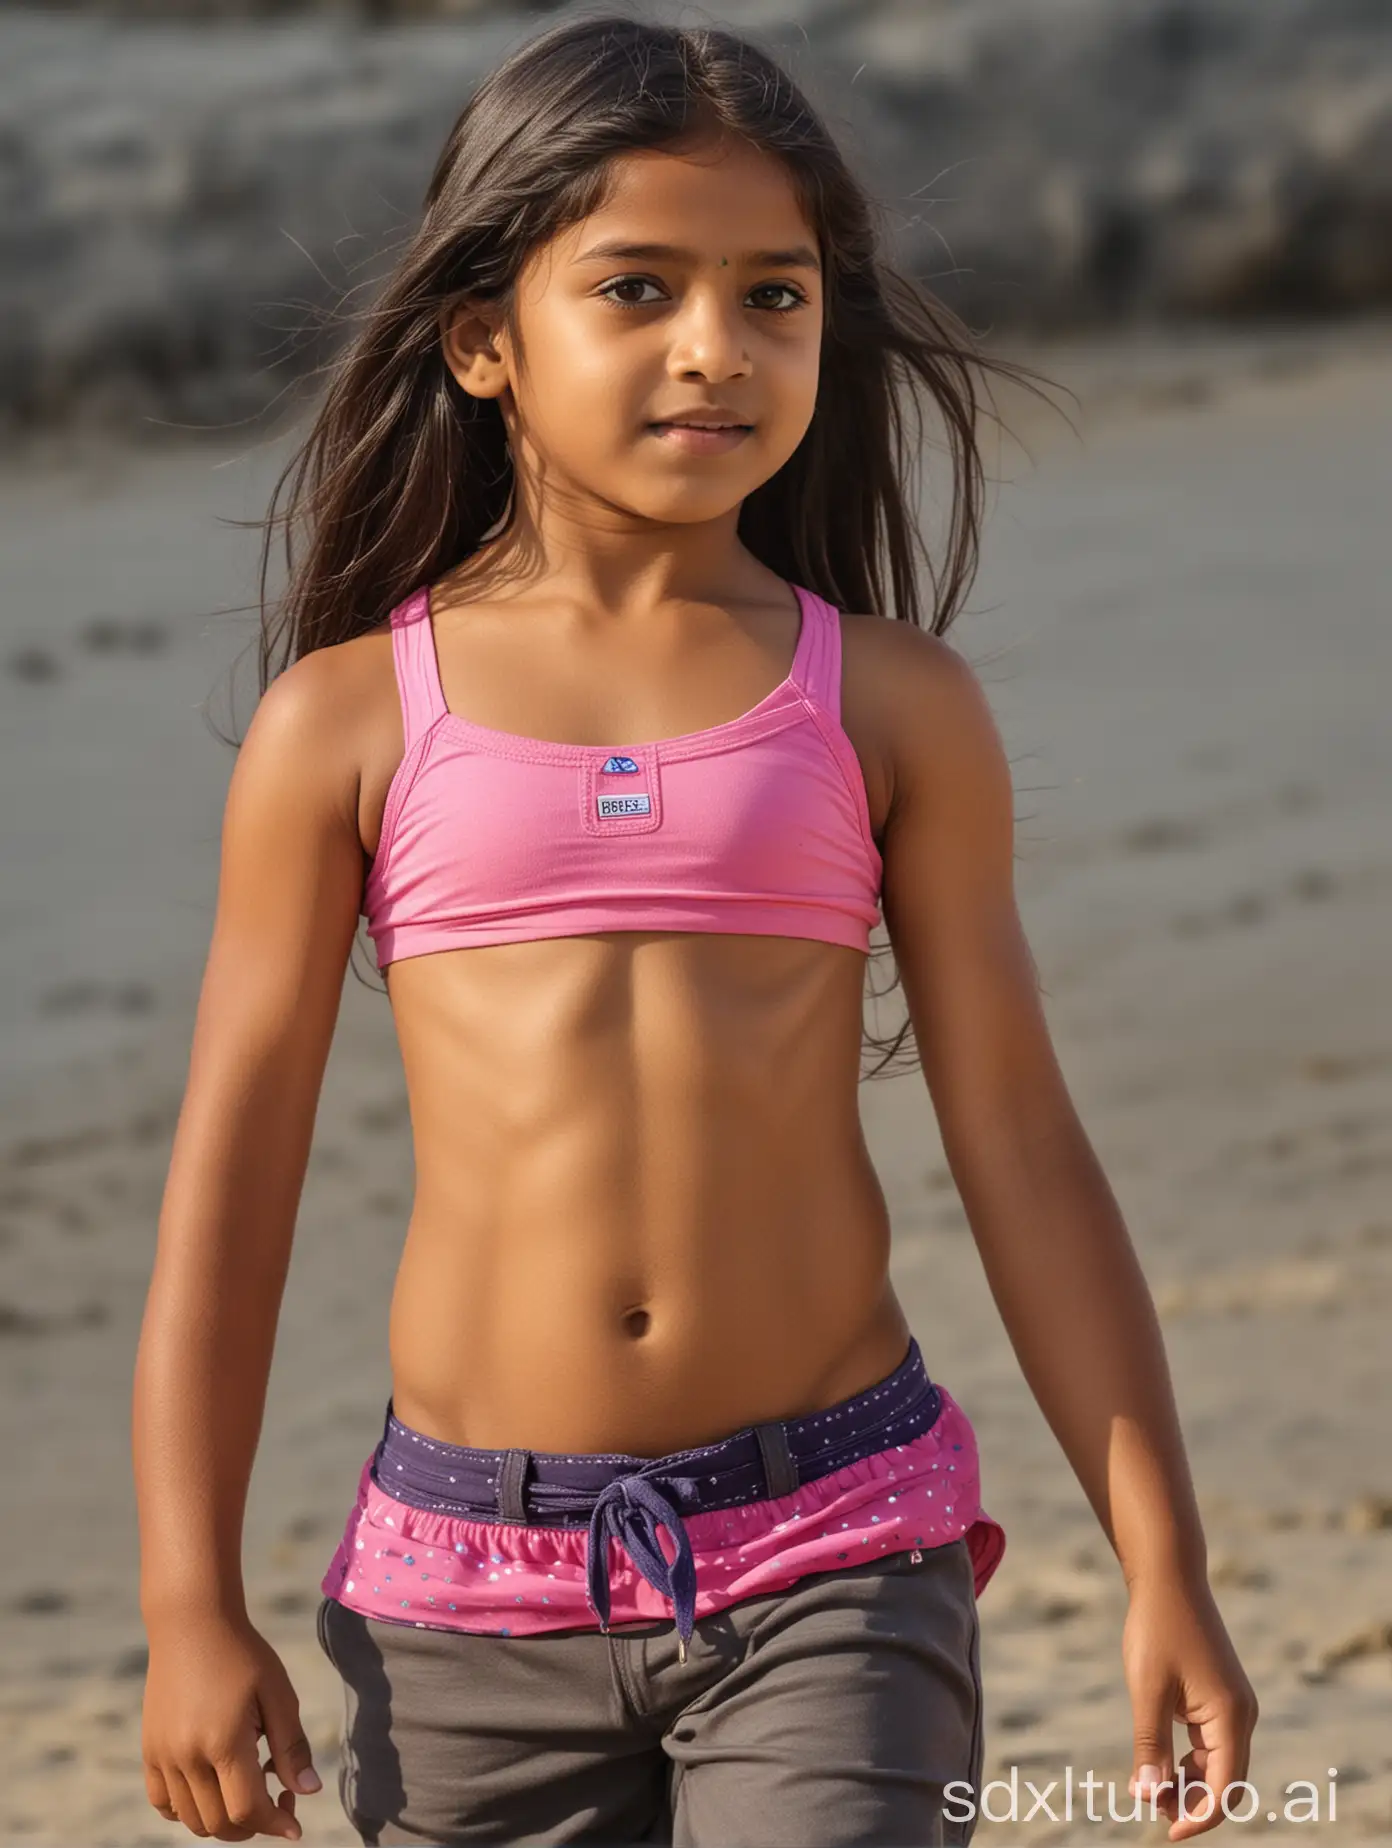 8 years old Indian girl, long hair, very muscular abs, flat chested, showing belly, beach in India